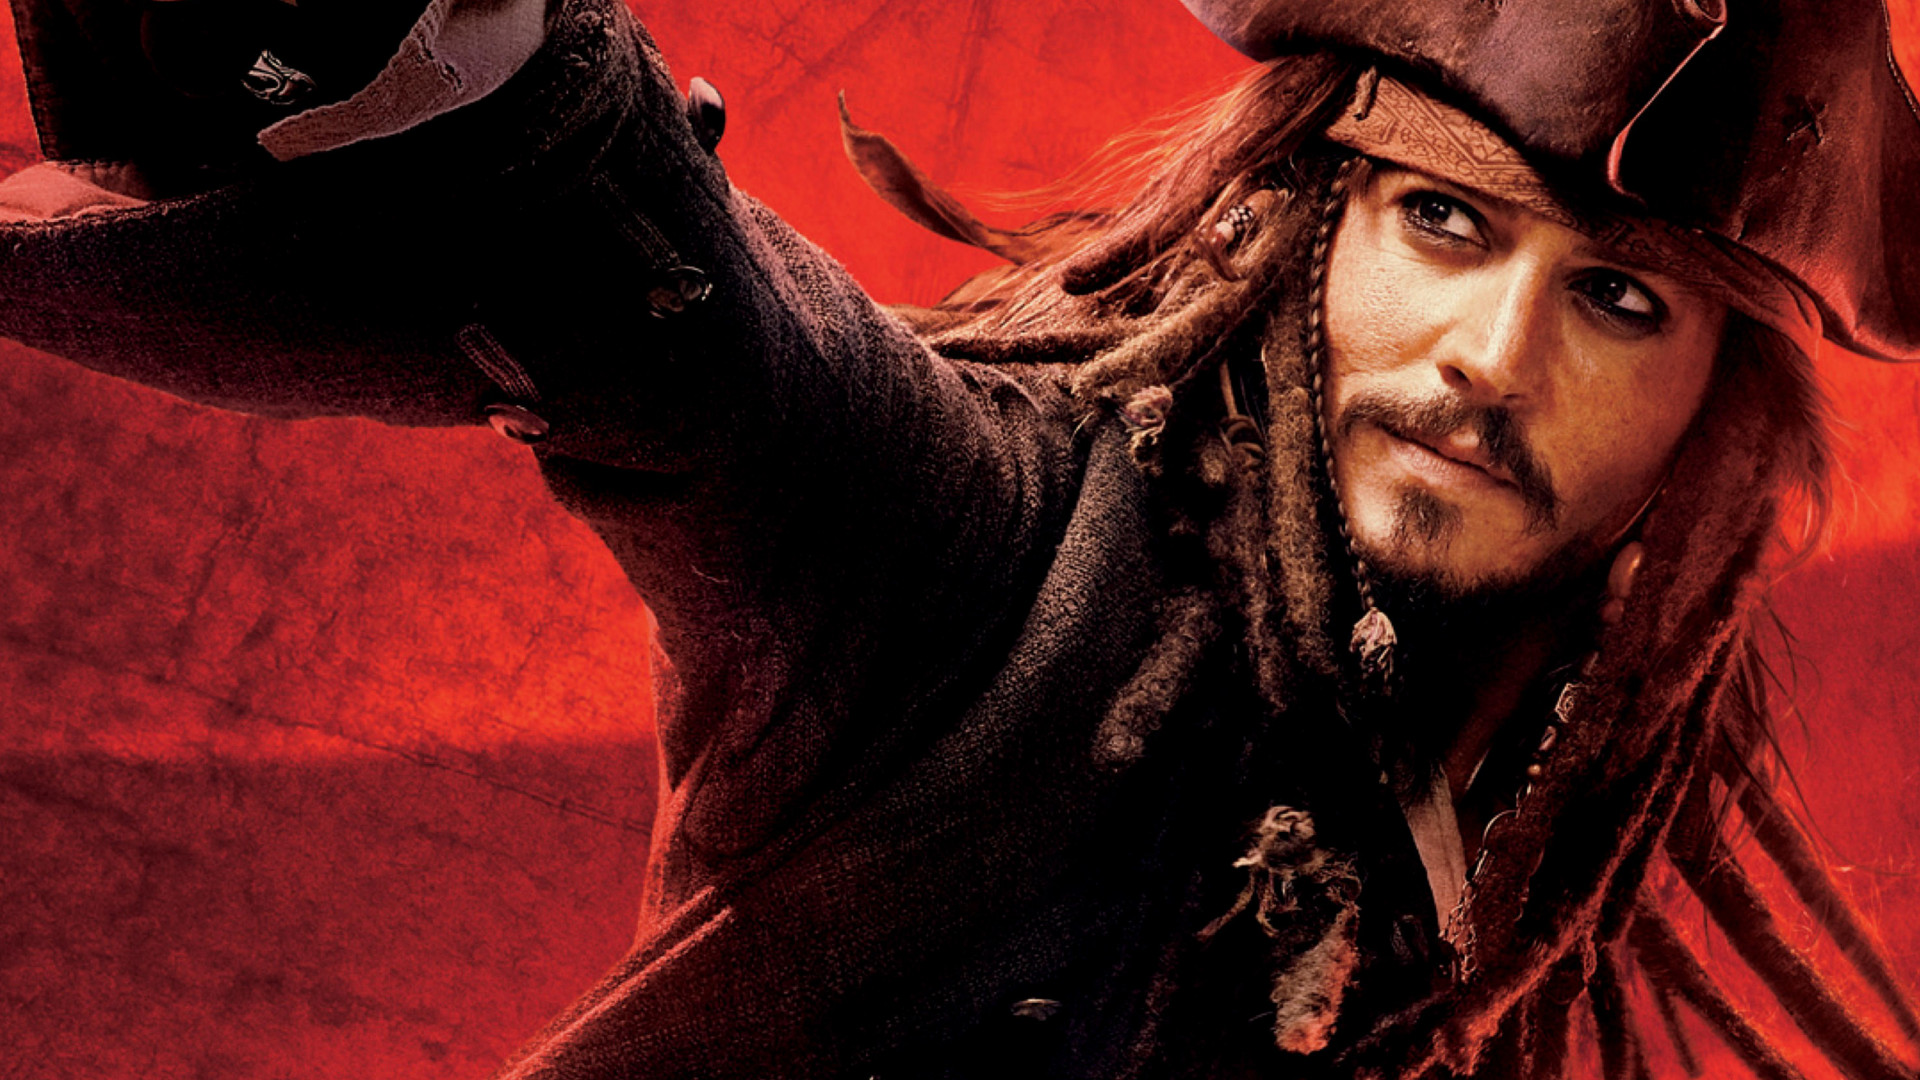 movie, pirates of the caribbean: at world's end, jack sparrow, johnny depp, pirates of the caribbean for android